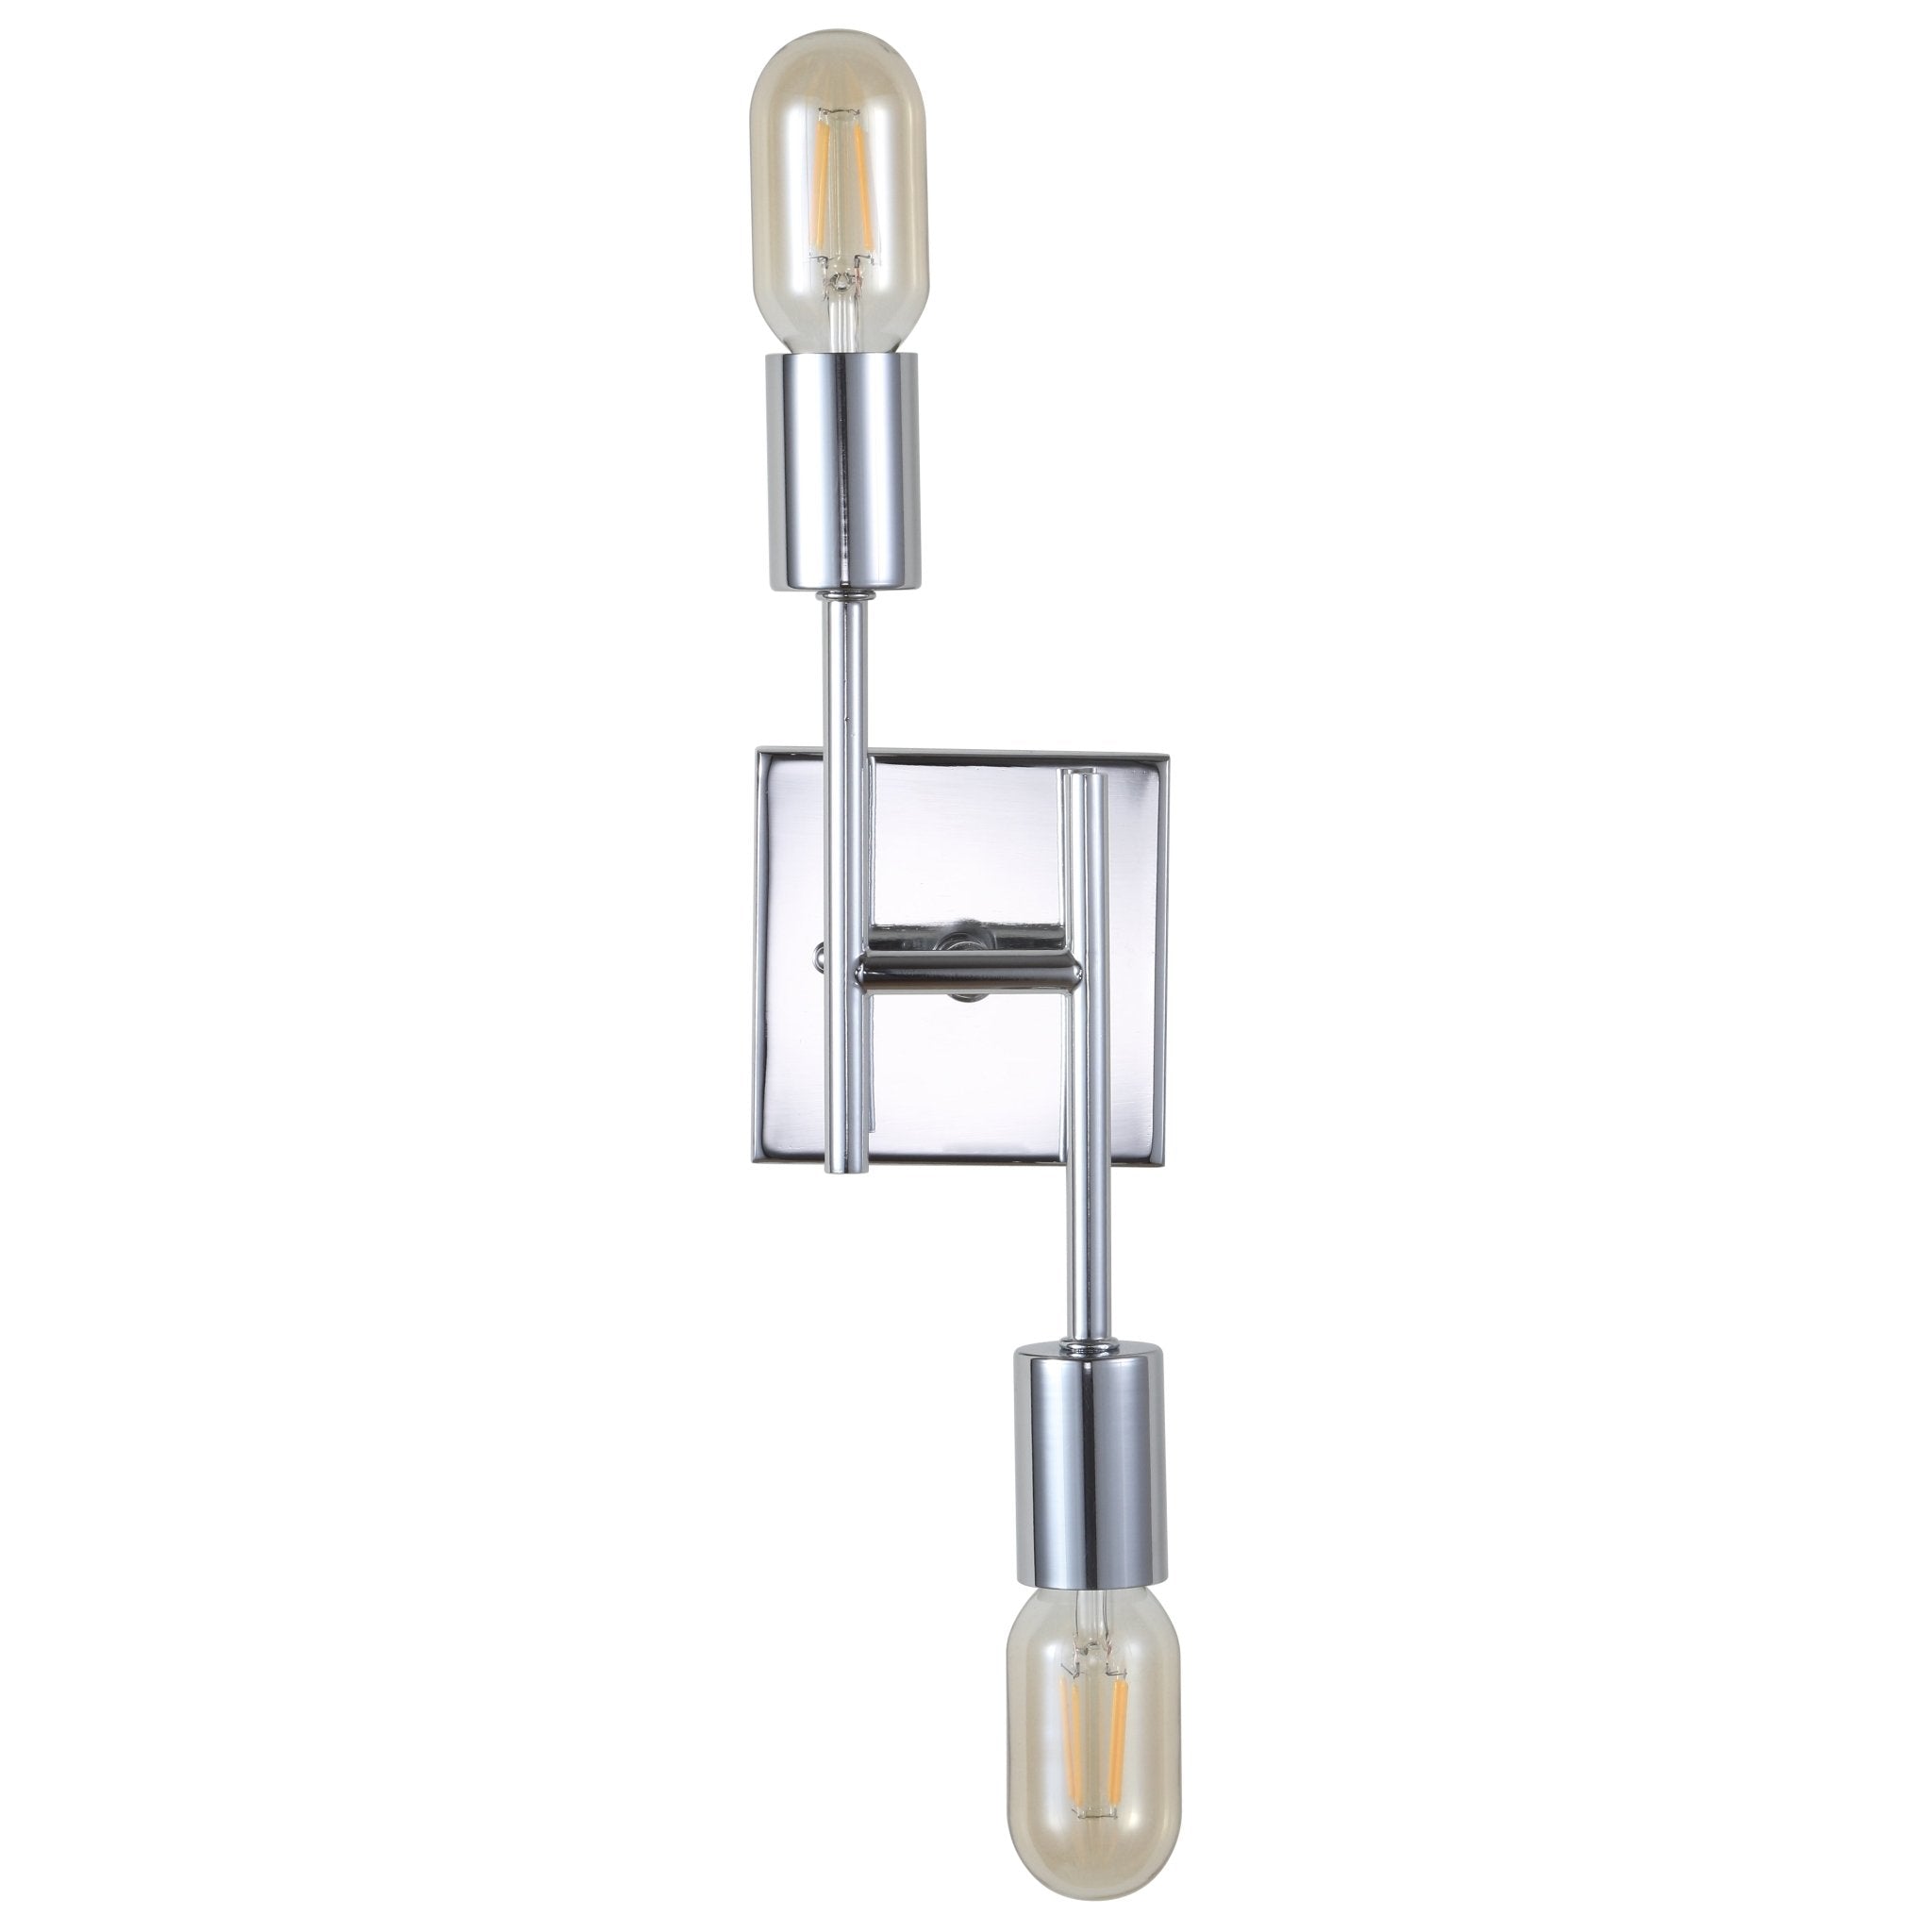 Turing Light Metal LED Wall Sconce - Wall Sconce